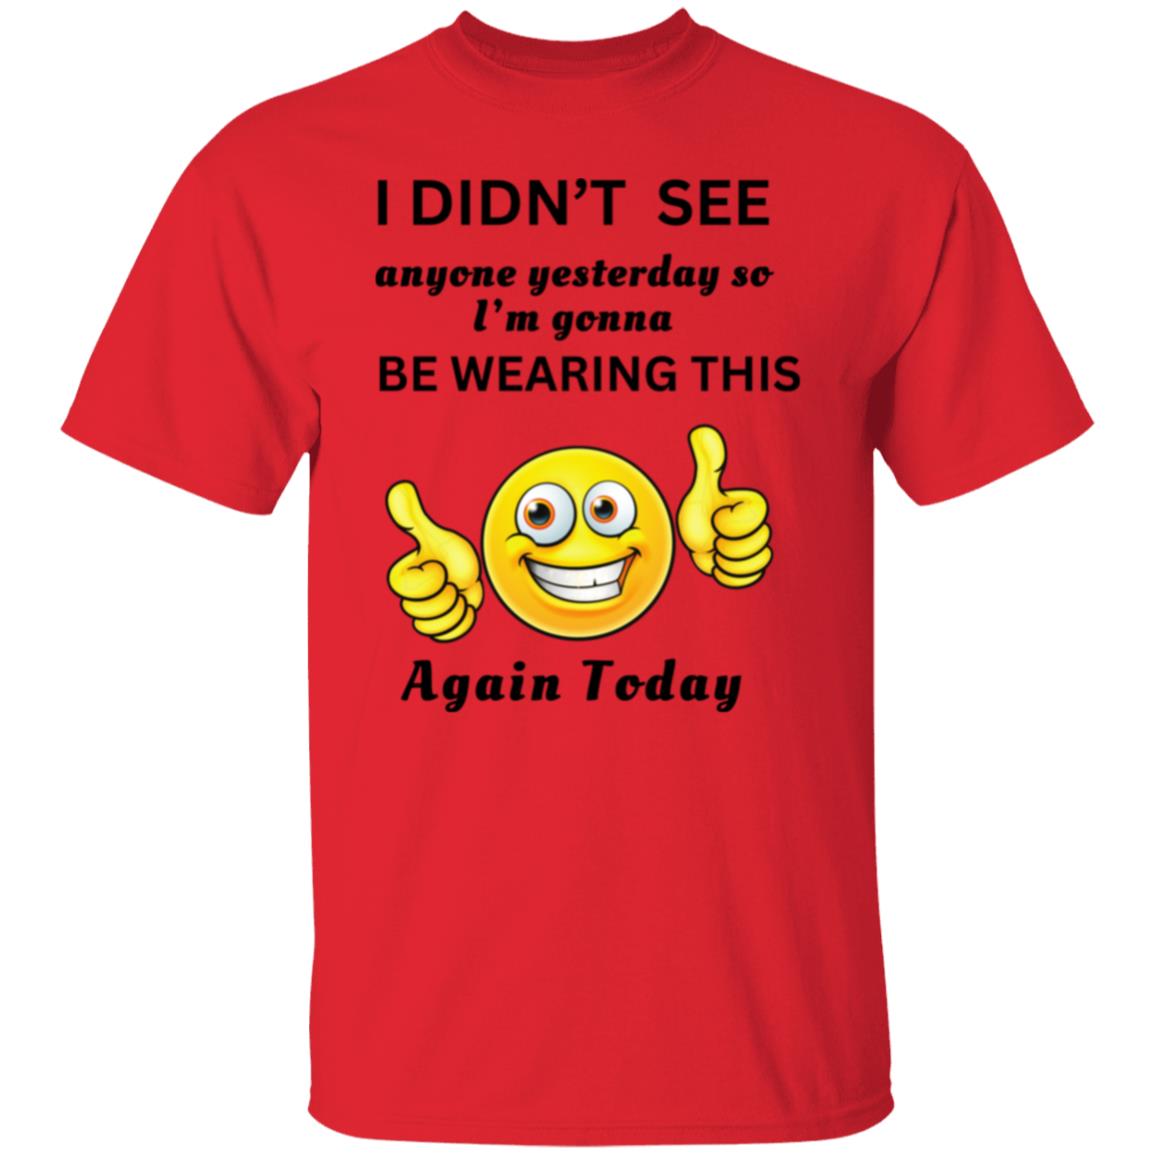 I DIDNT SEE ANYONE YESTERDAY... (UNISEX) T-Shirt